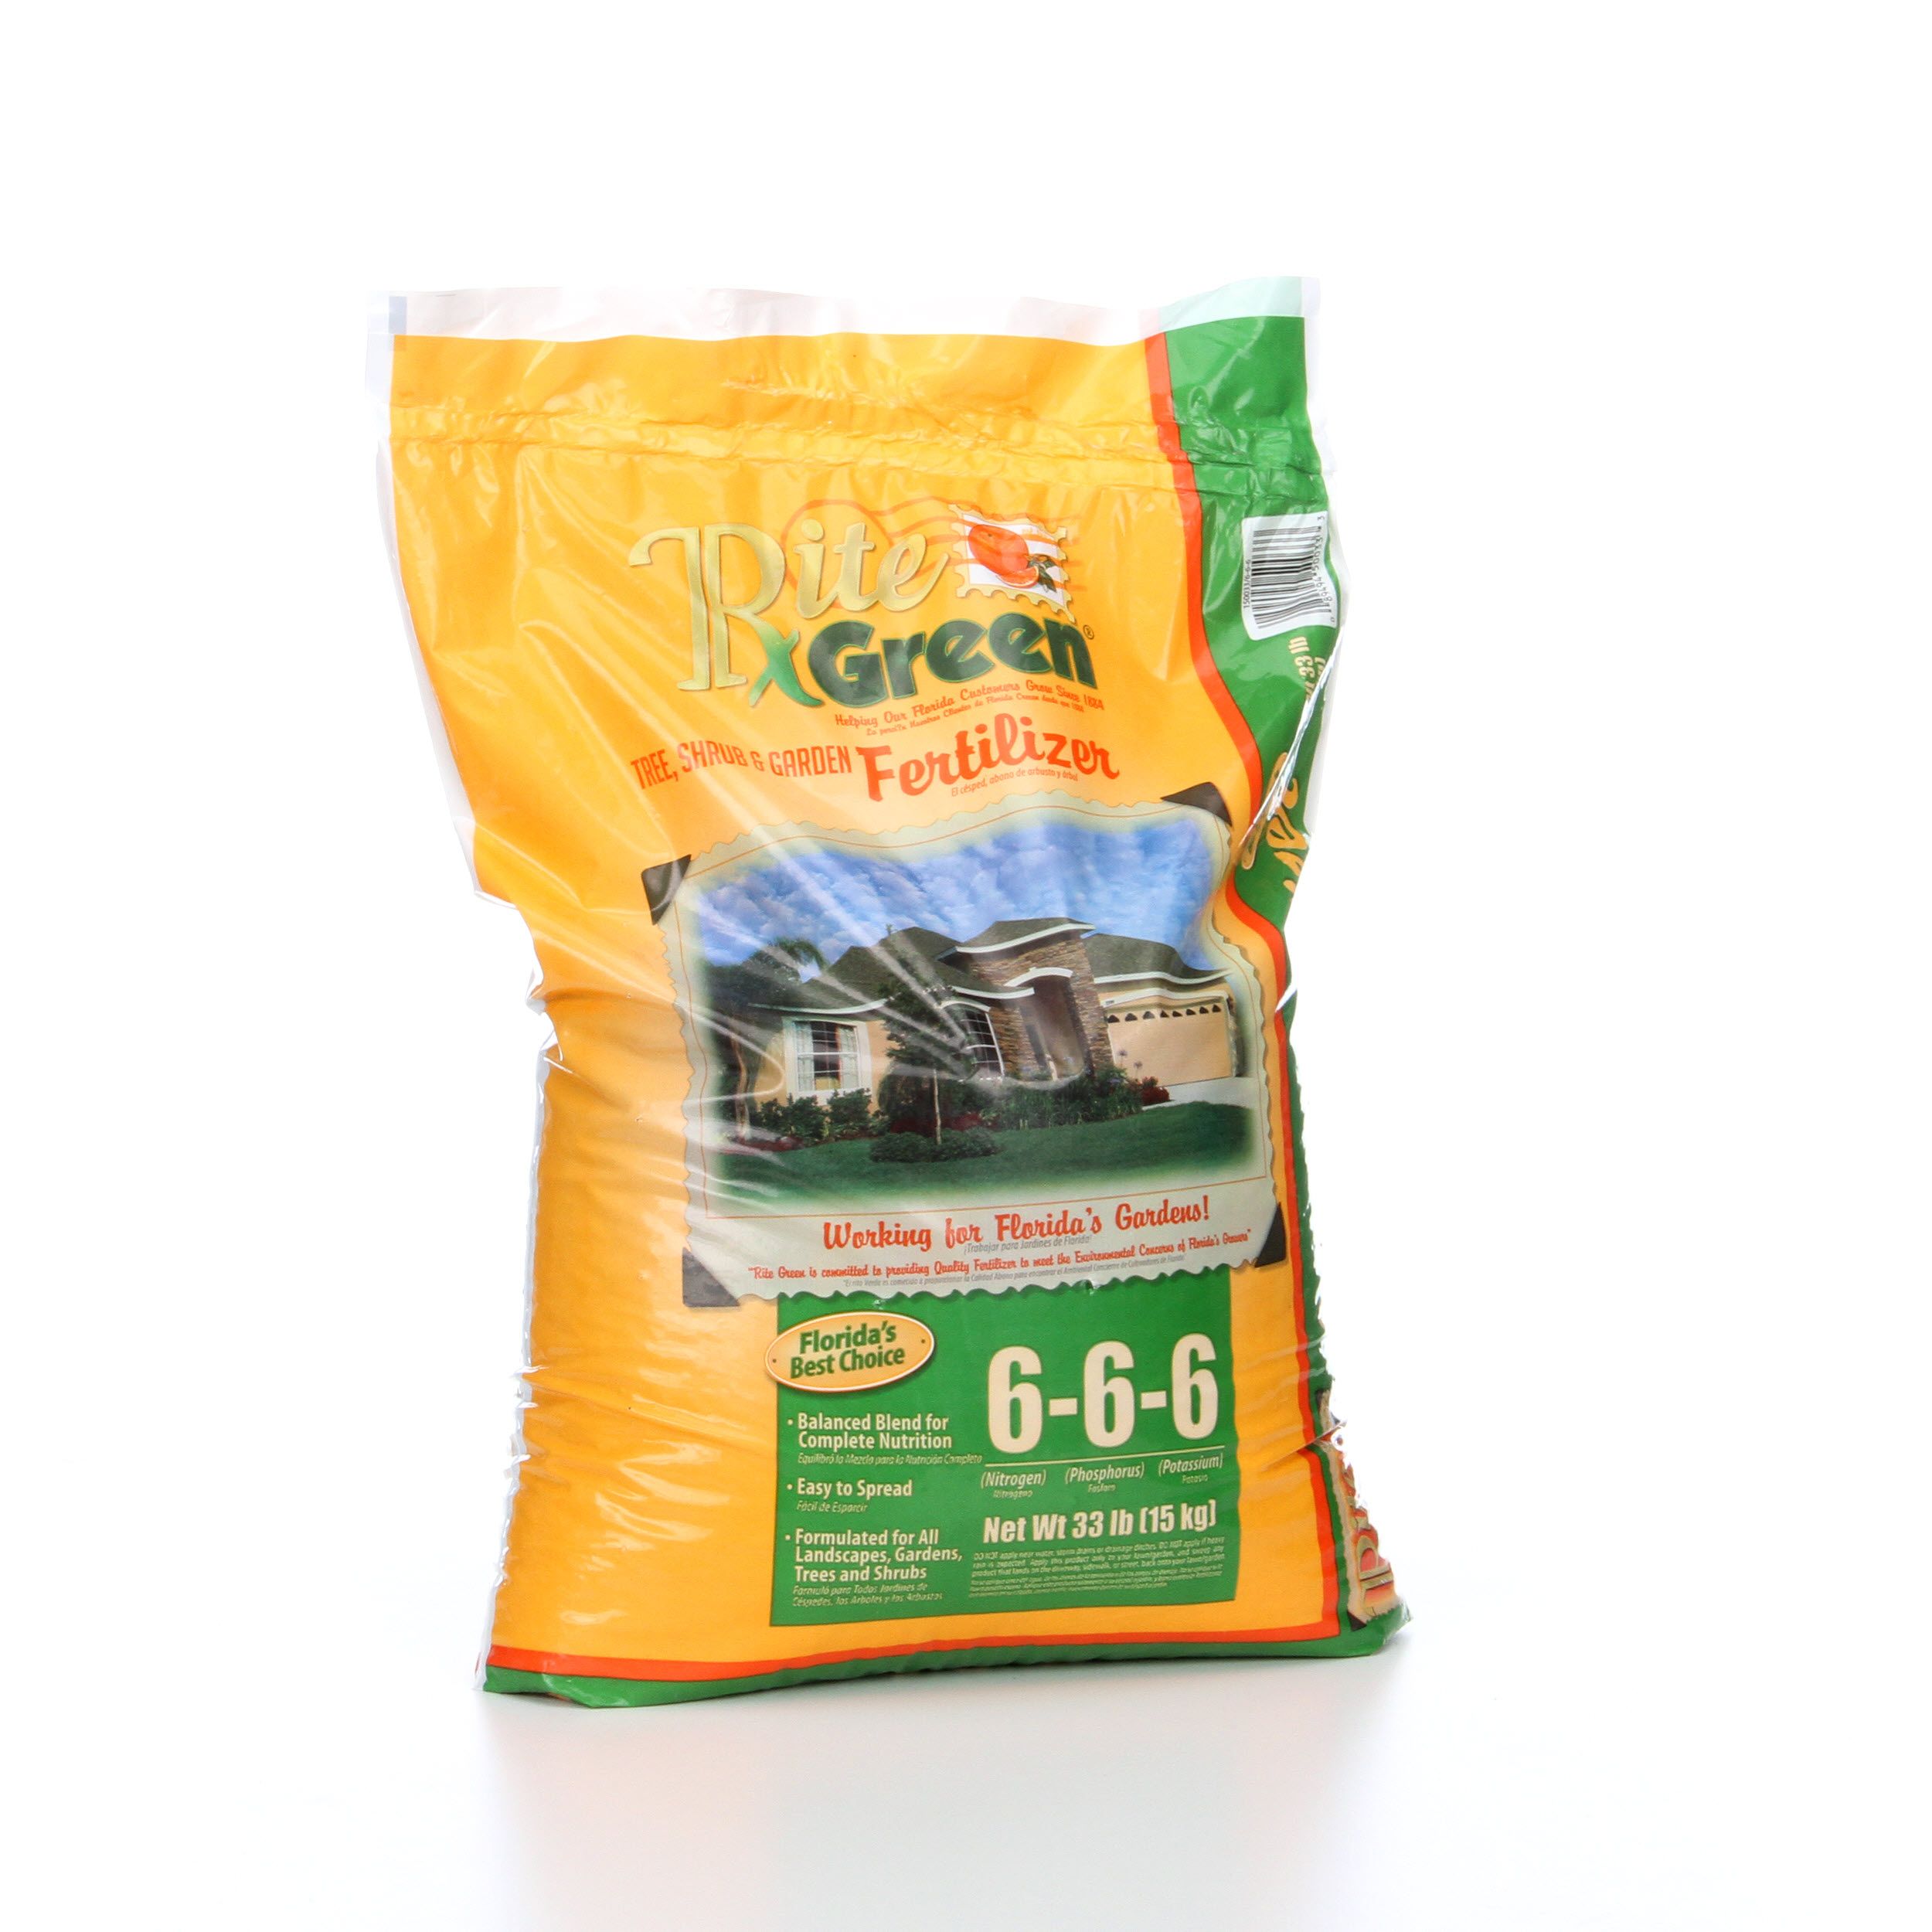 What Is 6-6-6 Fertilizer Good For